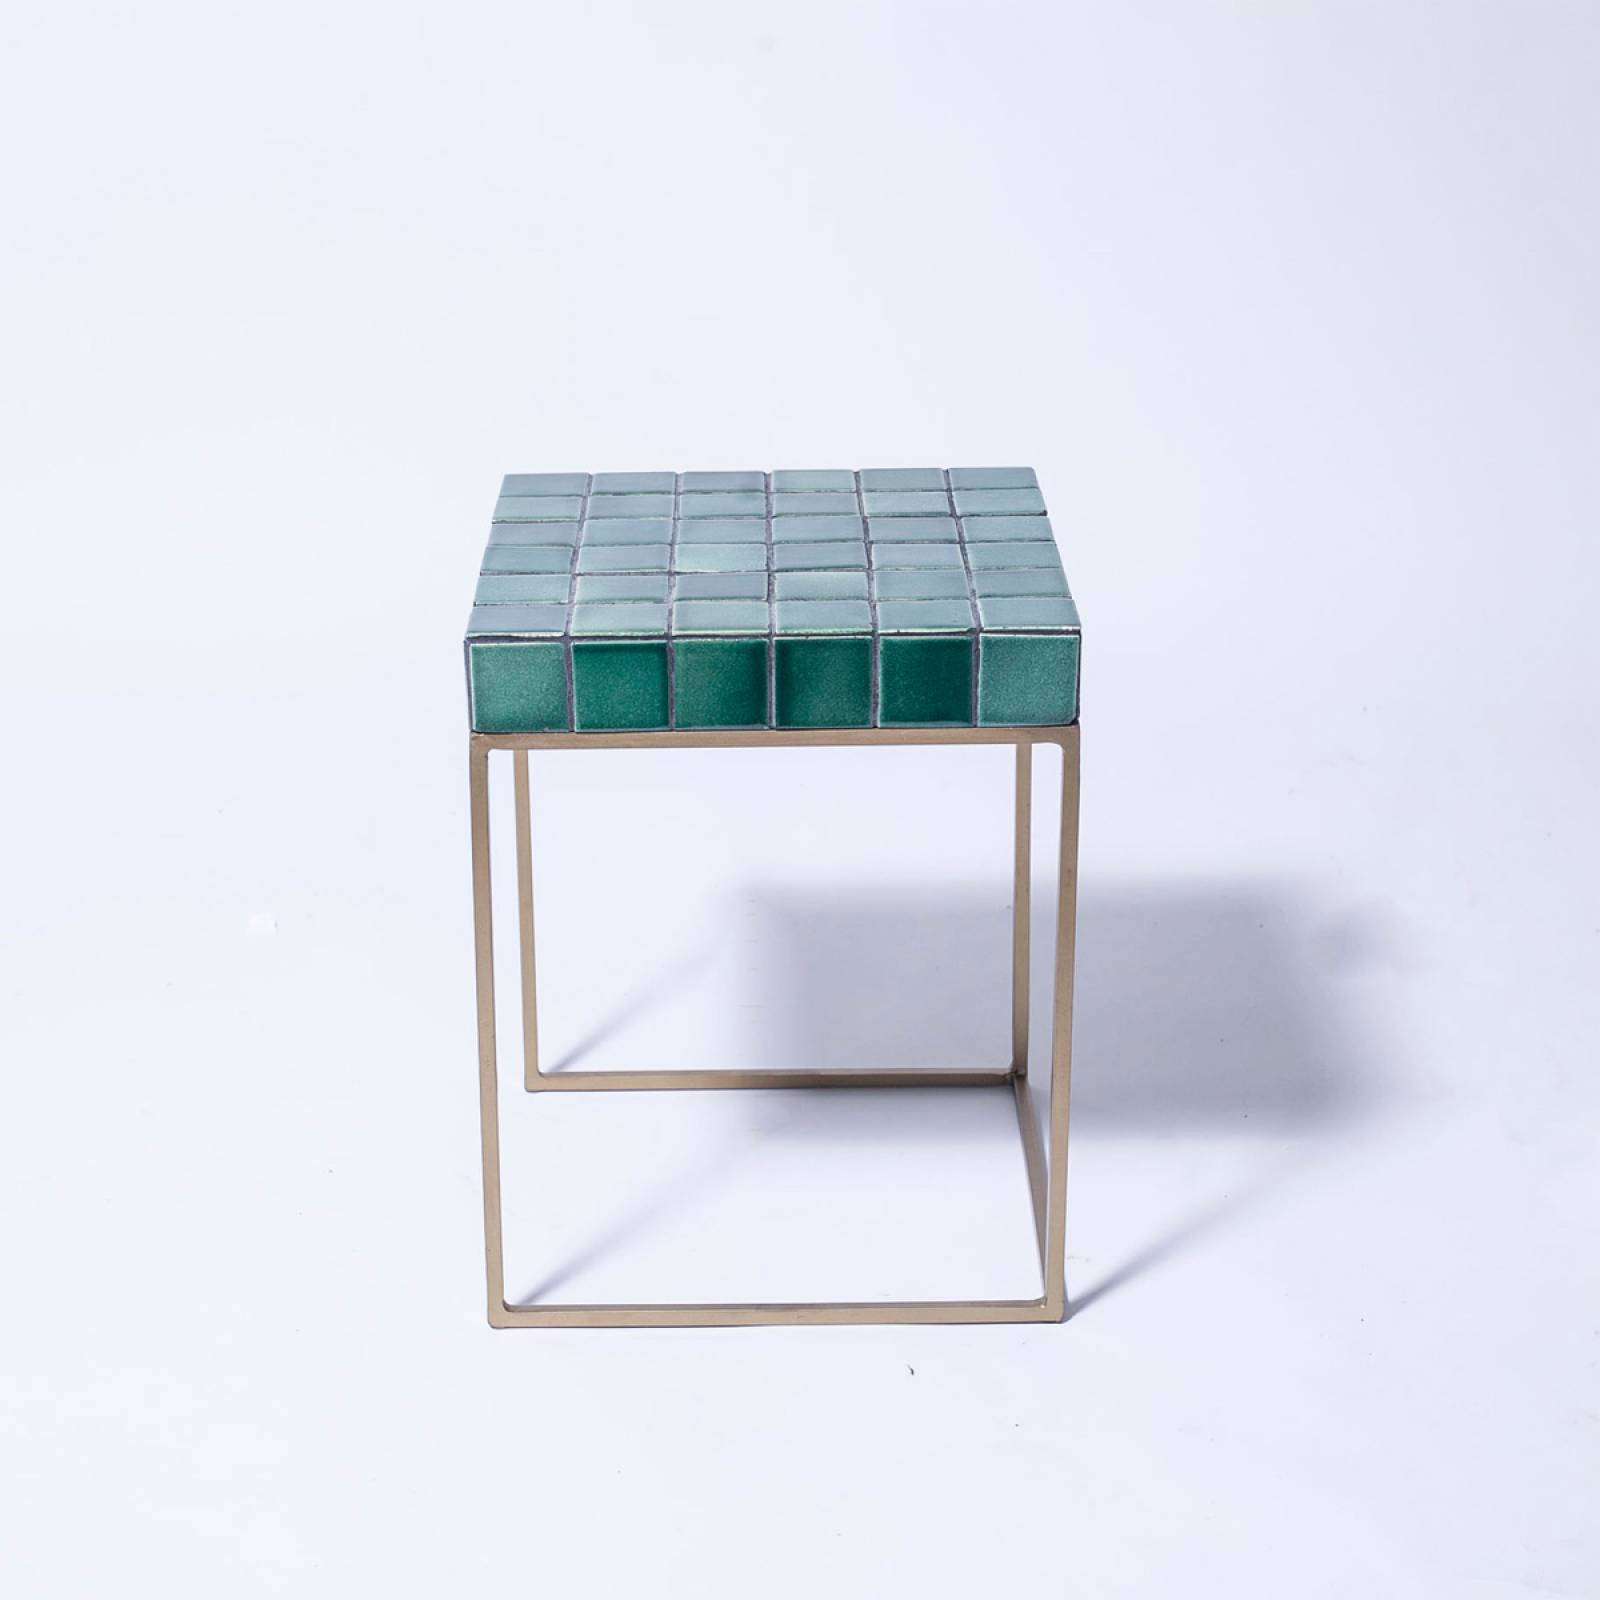 Green Tile Topped Side Table With Brass Frame